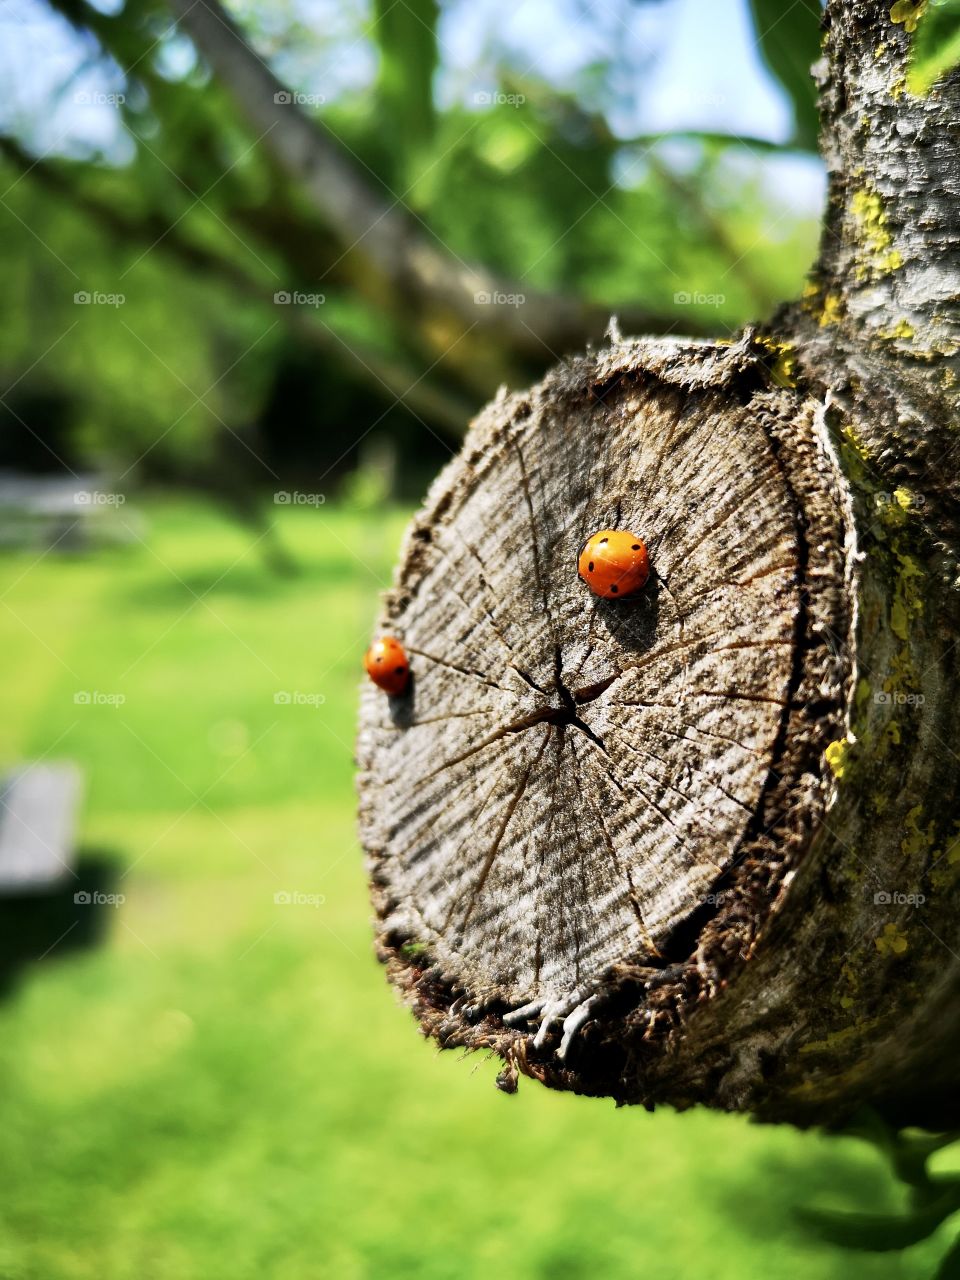 Two ladybugs in the tree